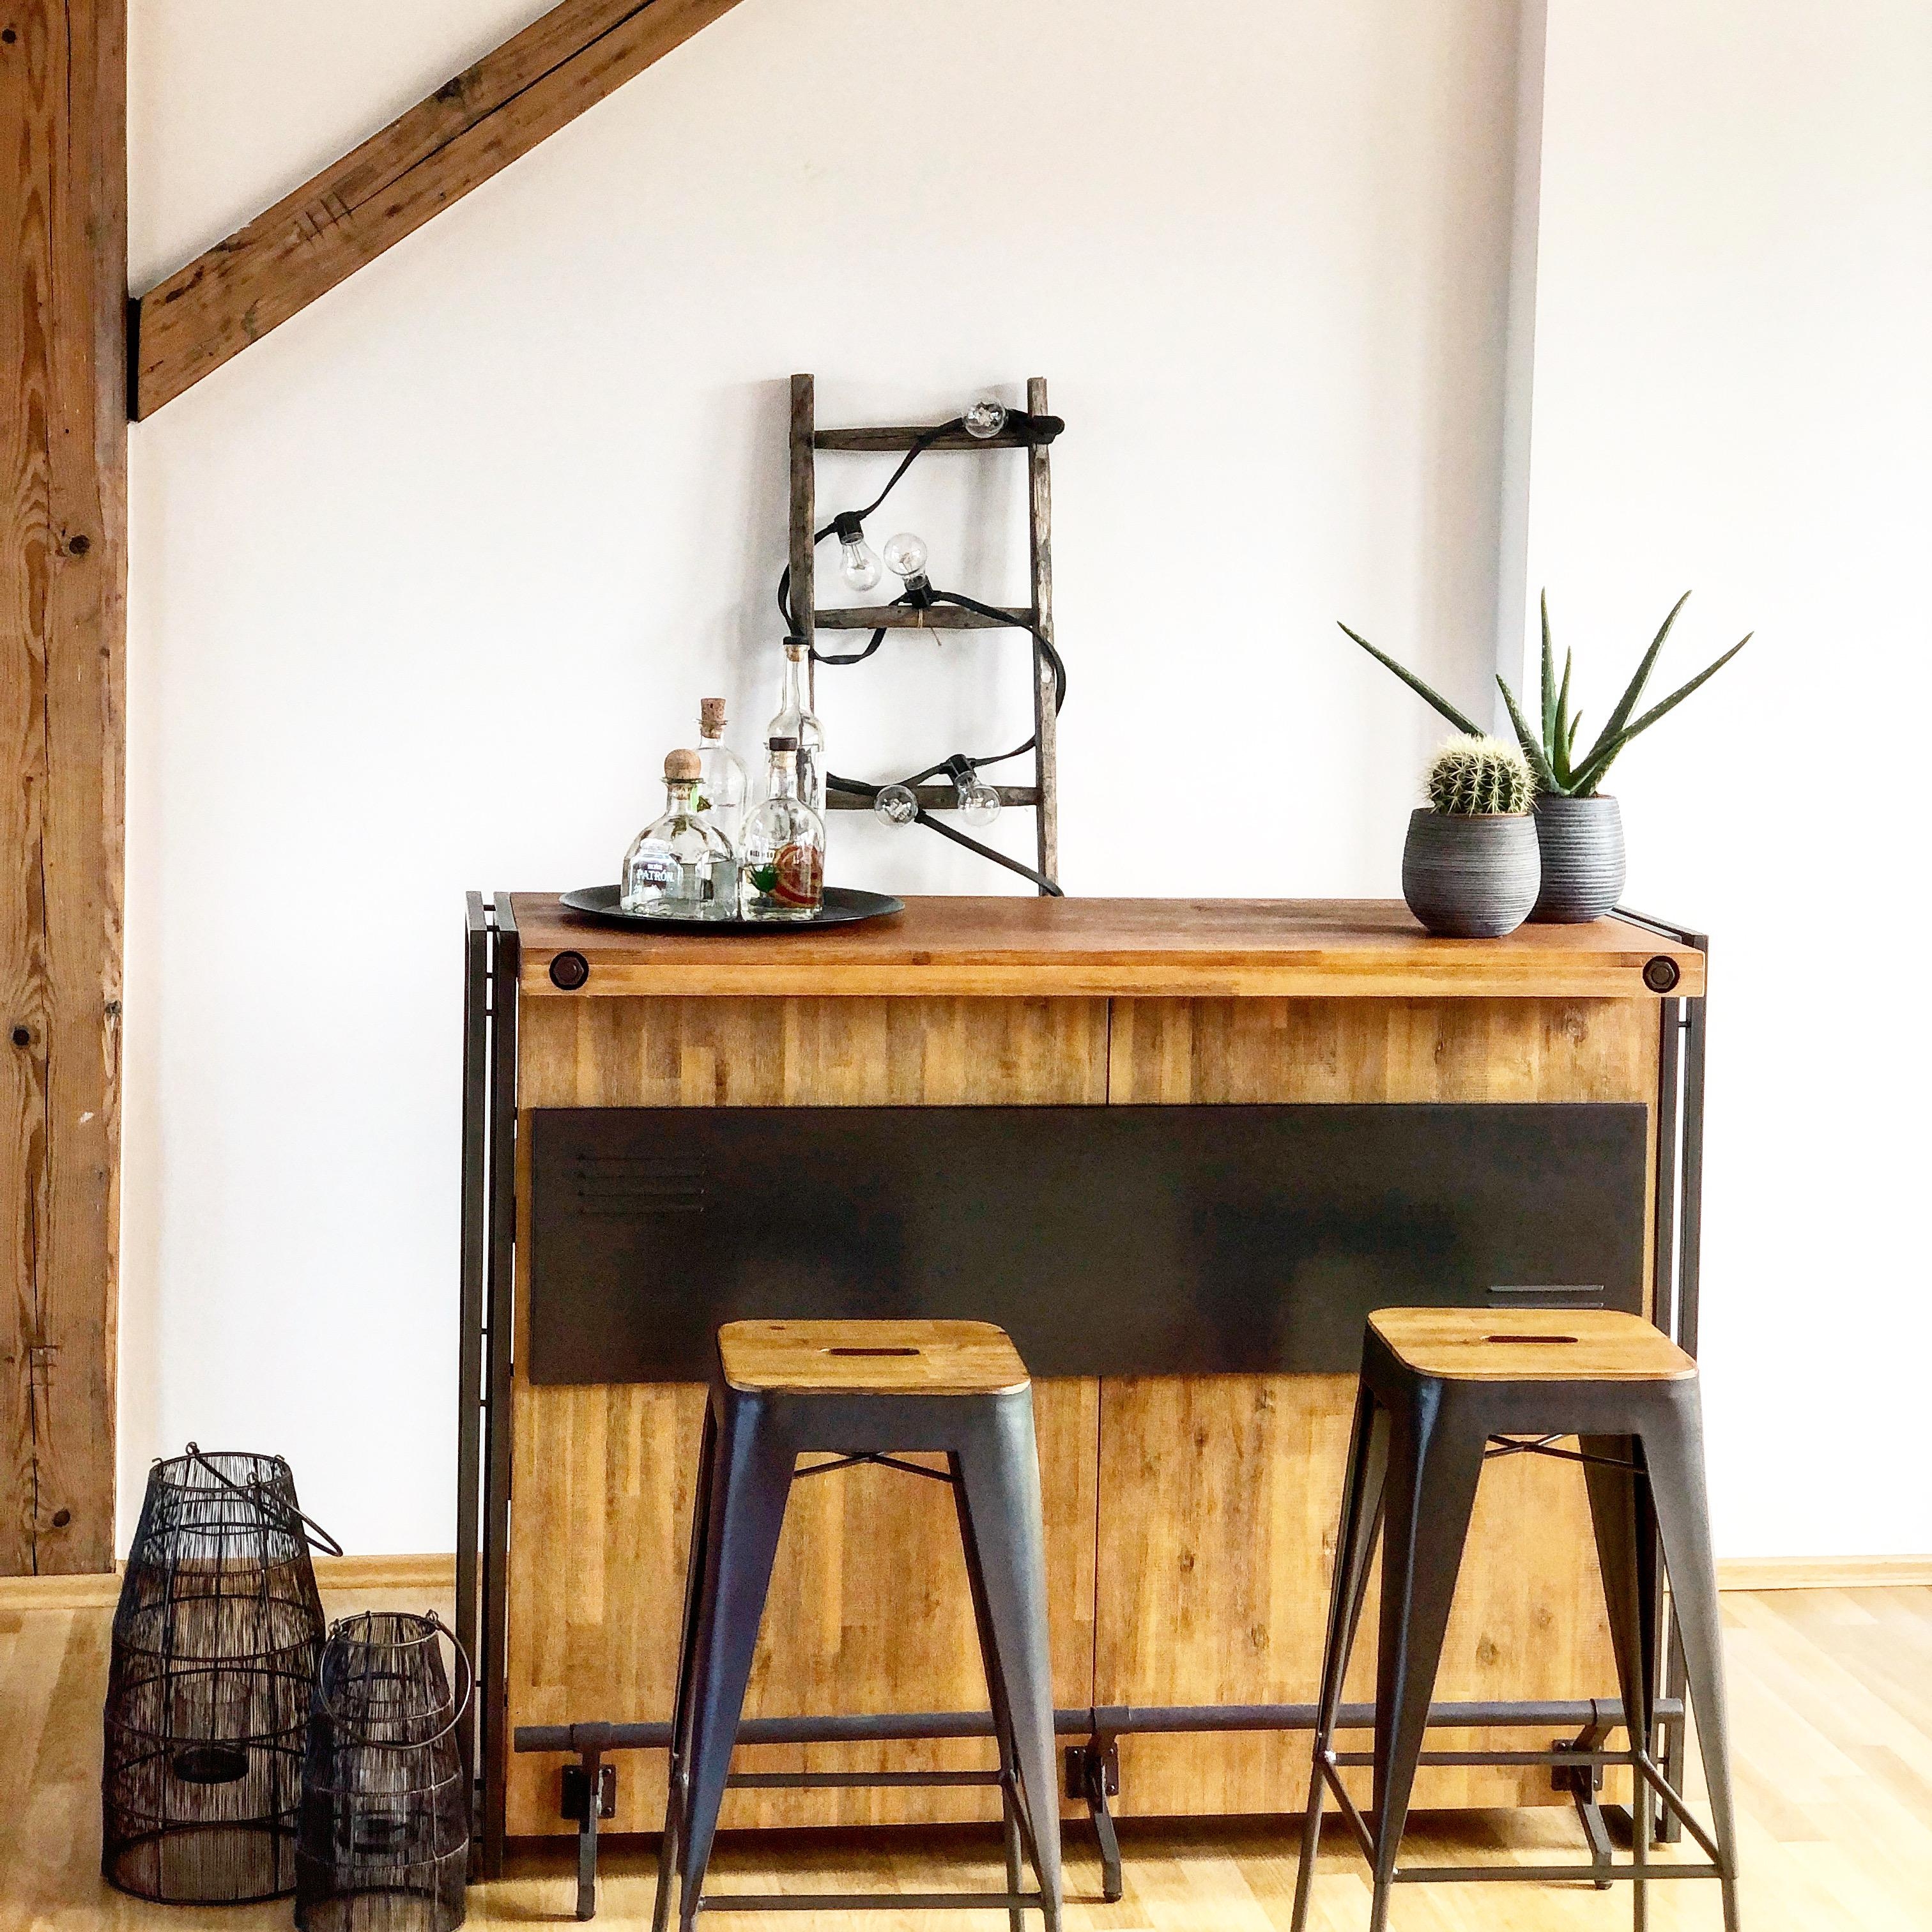 There’s place like a home bar! 
#homebar #dreamingofmexico #mezcal #tequila #loftstyle